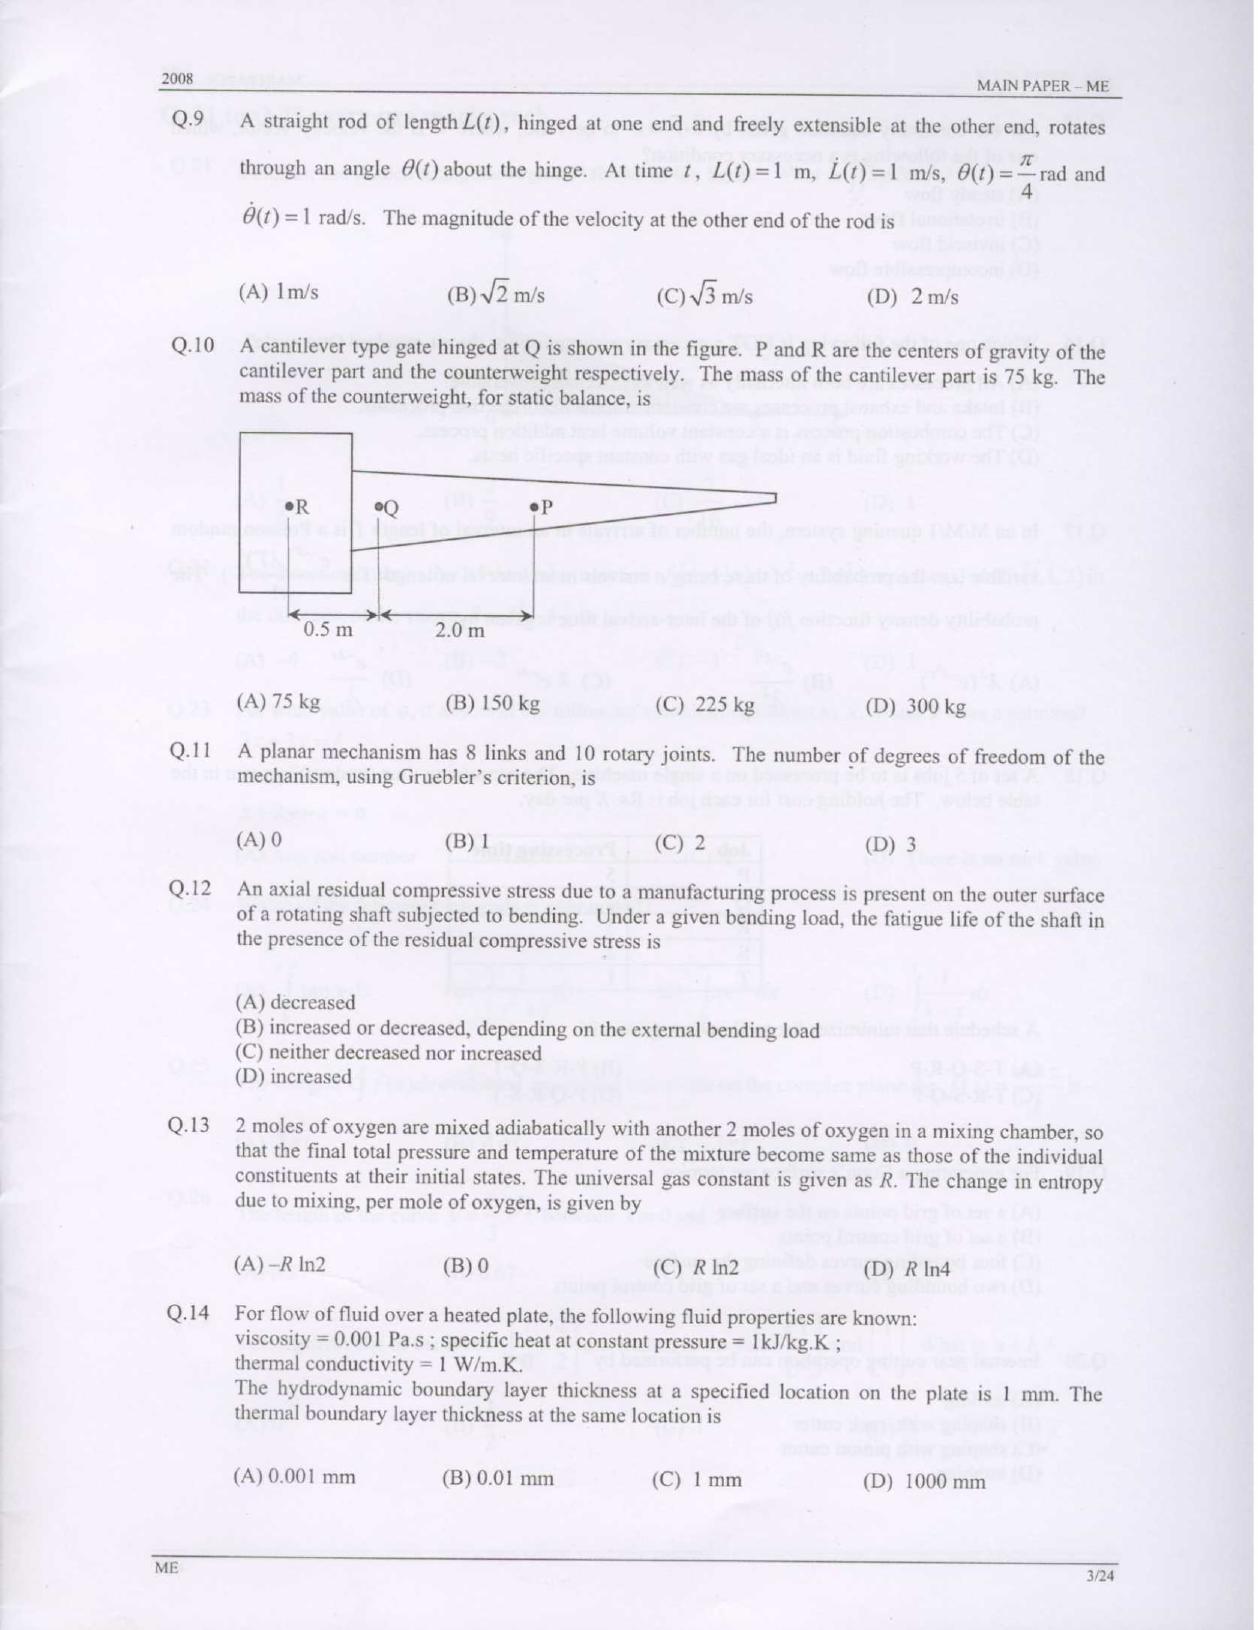 GATE 2008 Mechanical Engineering (ME) Question Paper with Answer Key - Page 3